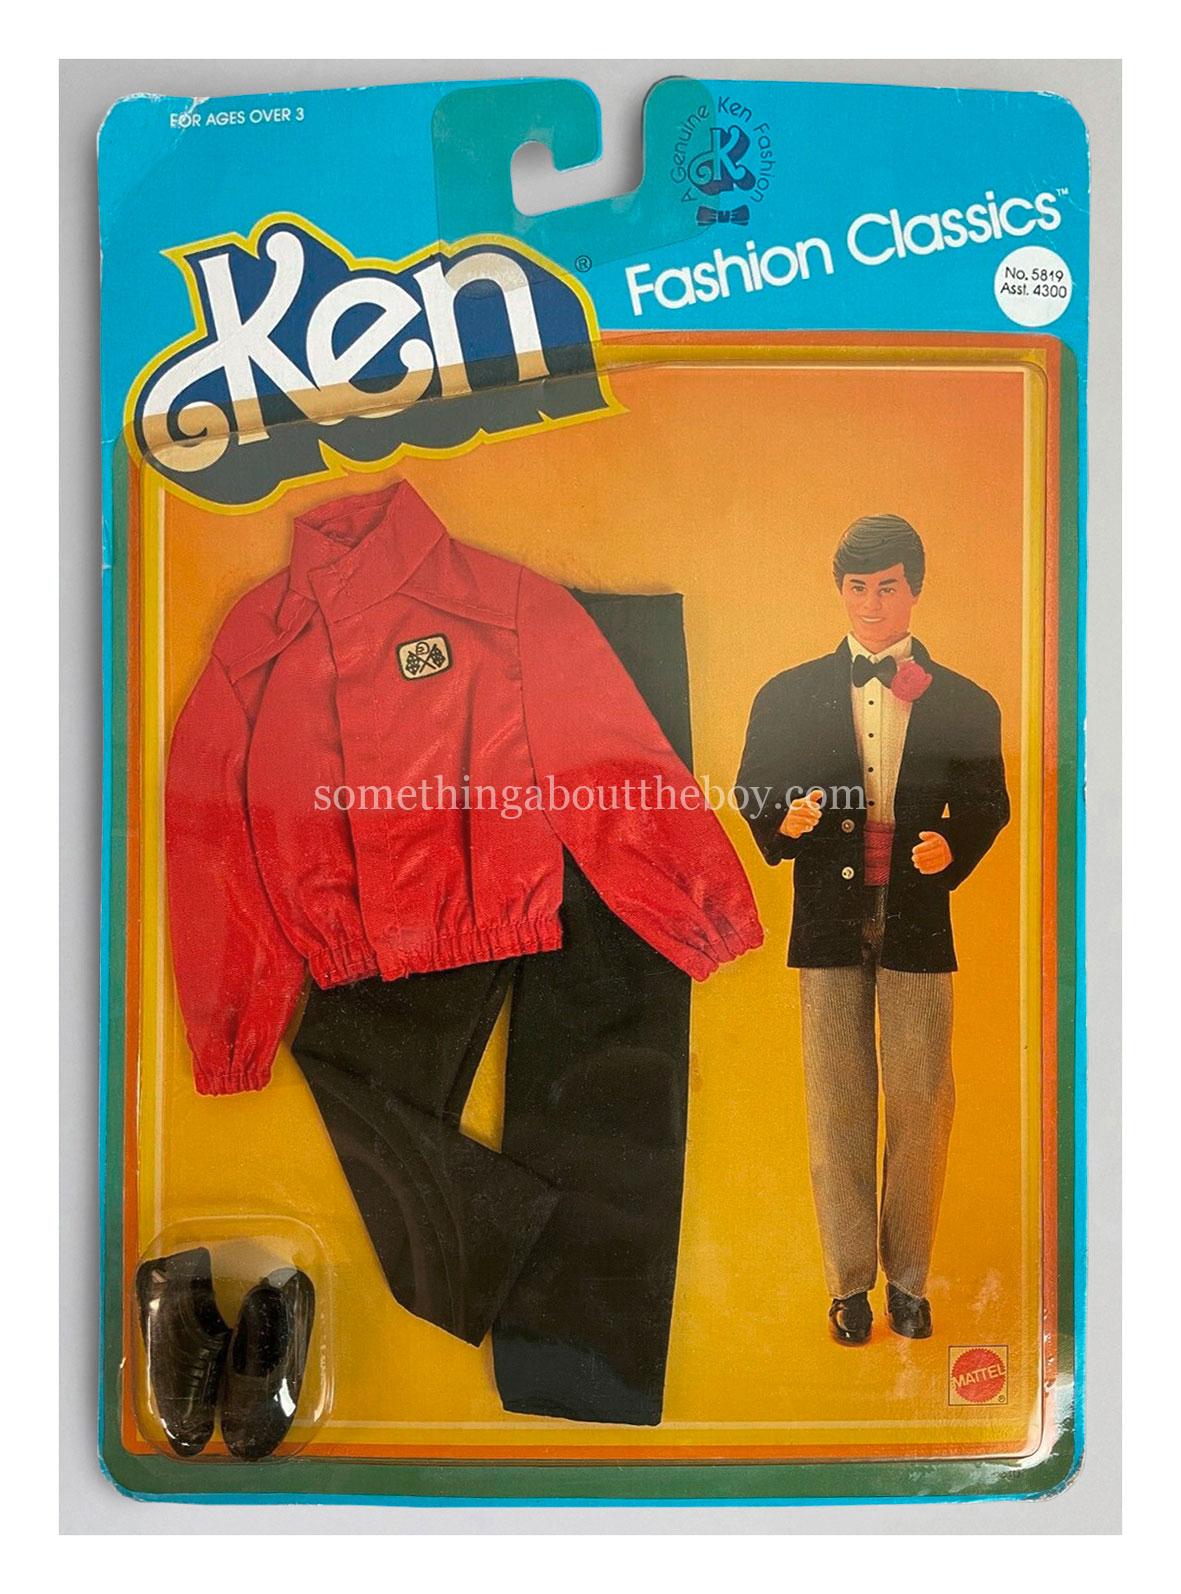 1983-84 Kmart Fashion Classics #5819 in original packaging (with sneakers)